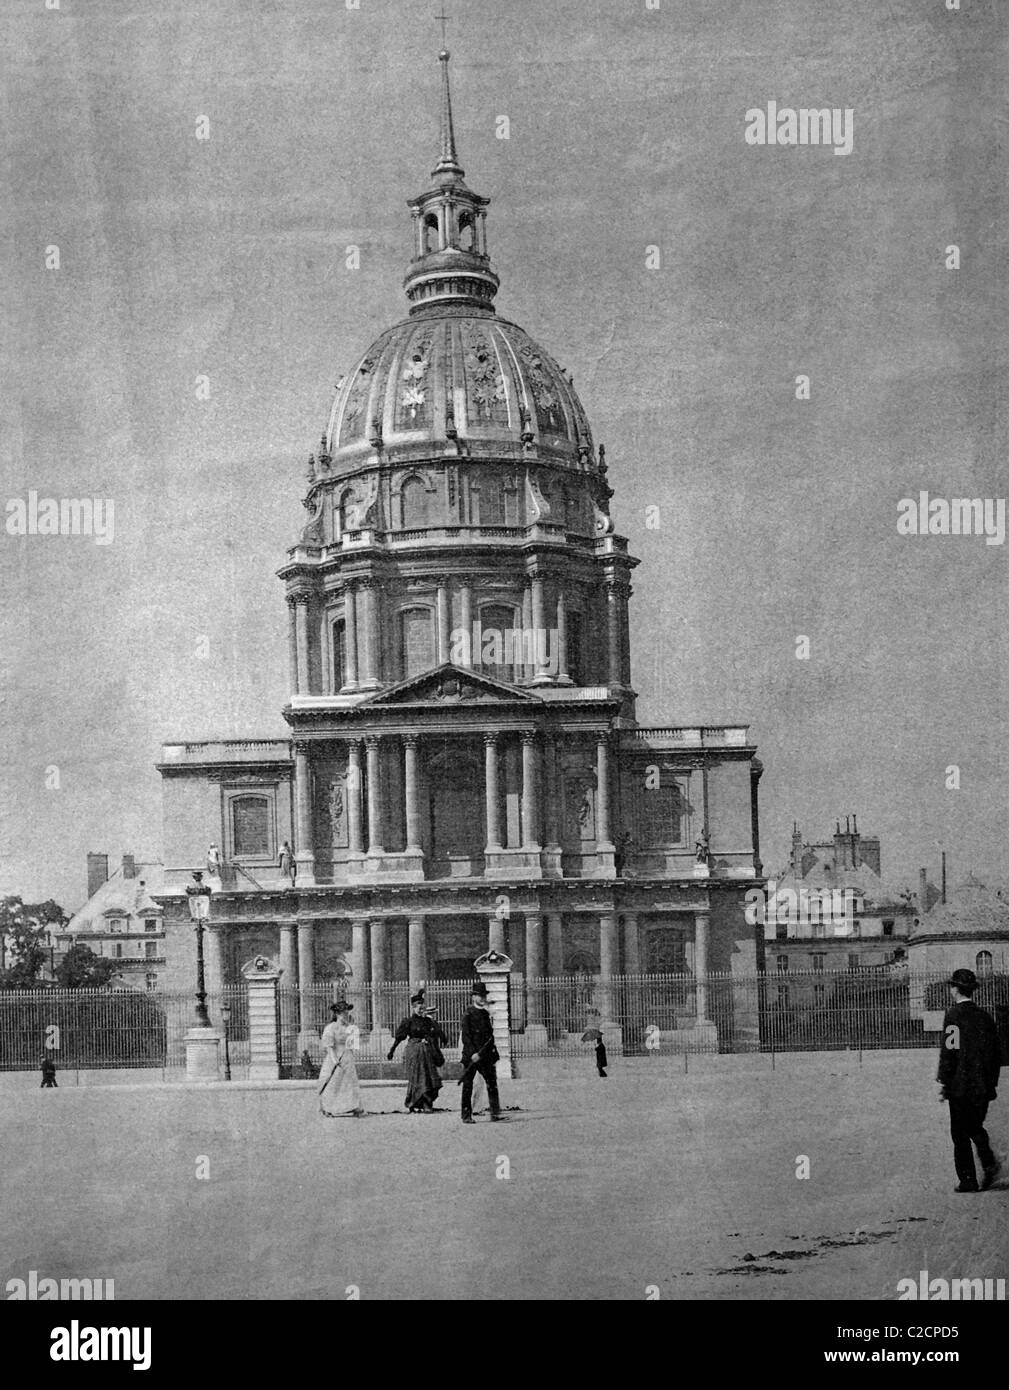 One of the first autotypes of Les Invalides, Paris, France, historical photograph, 1884 Stock Photo